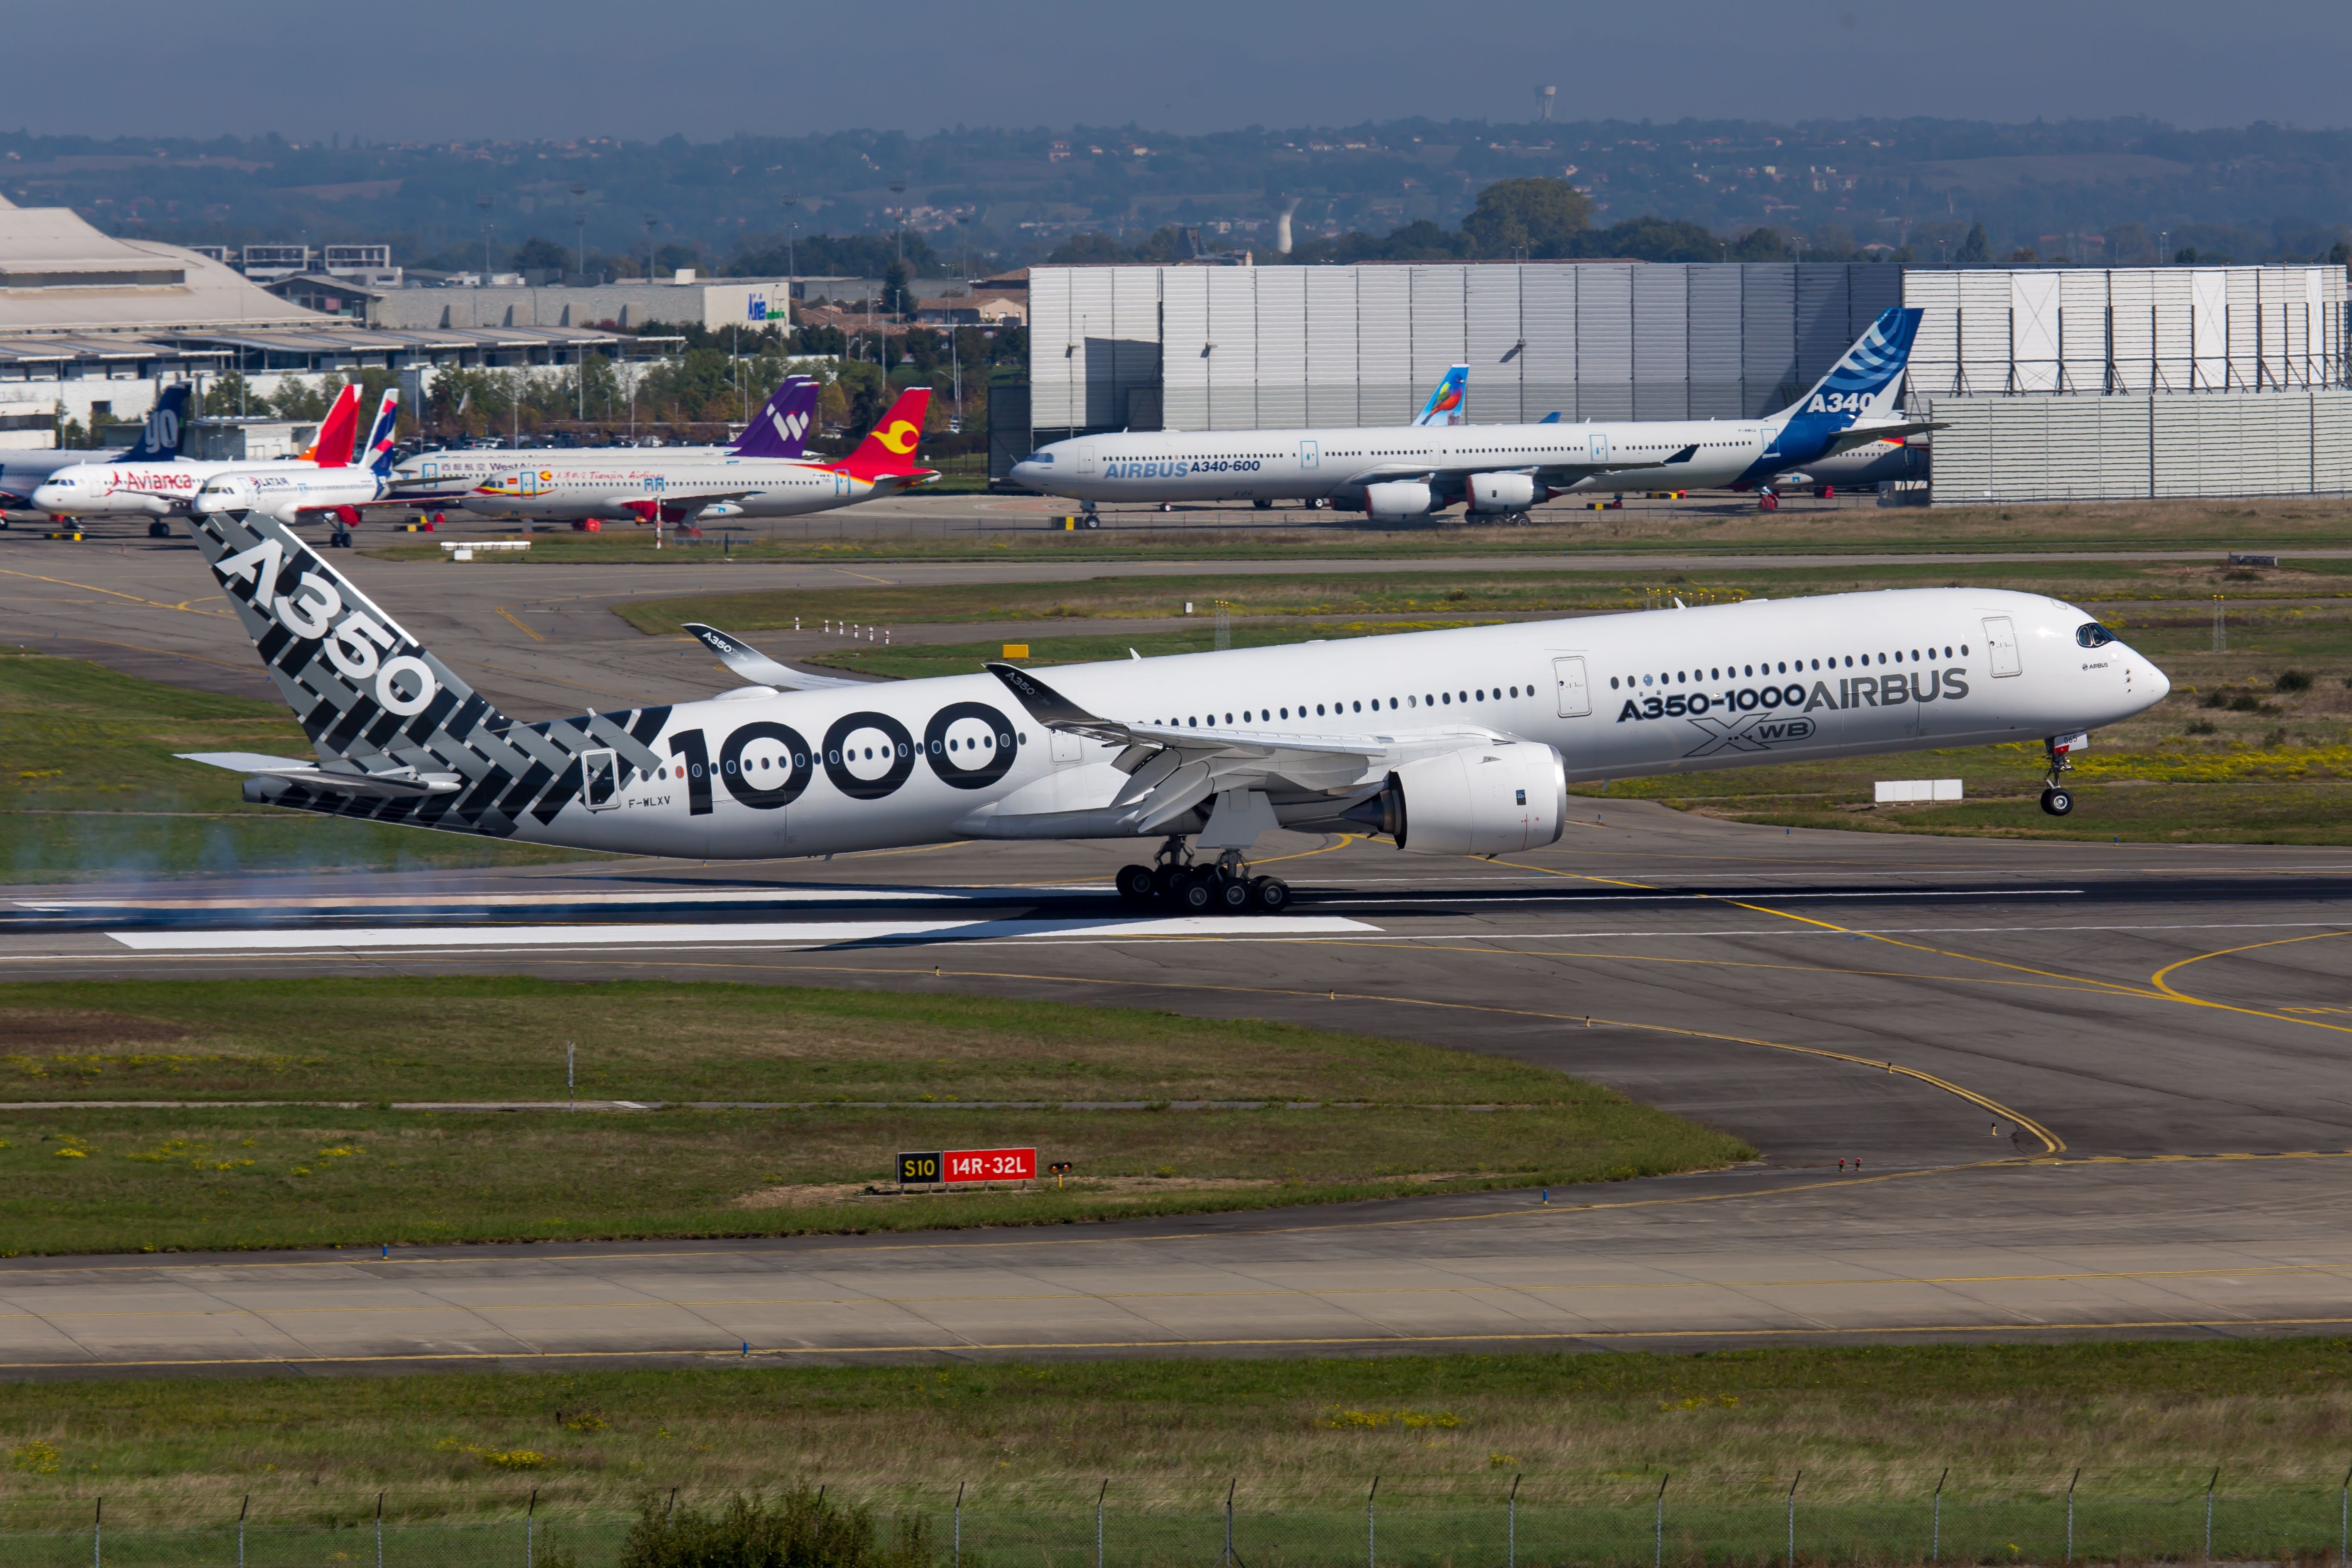 Airbus A350-1000 Landing In Toulouse